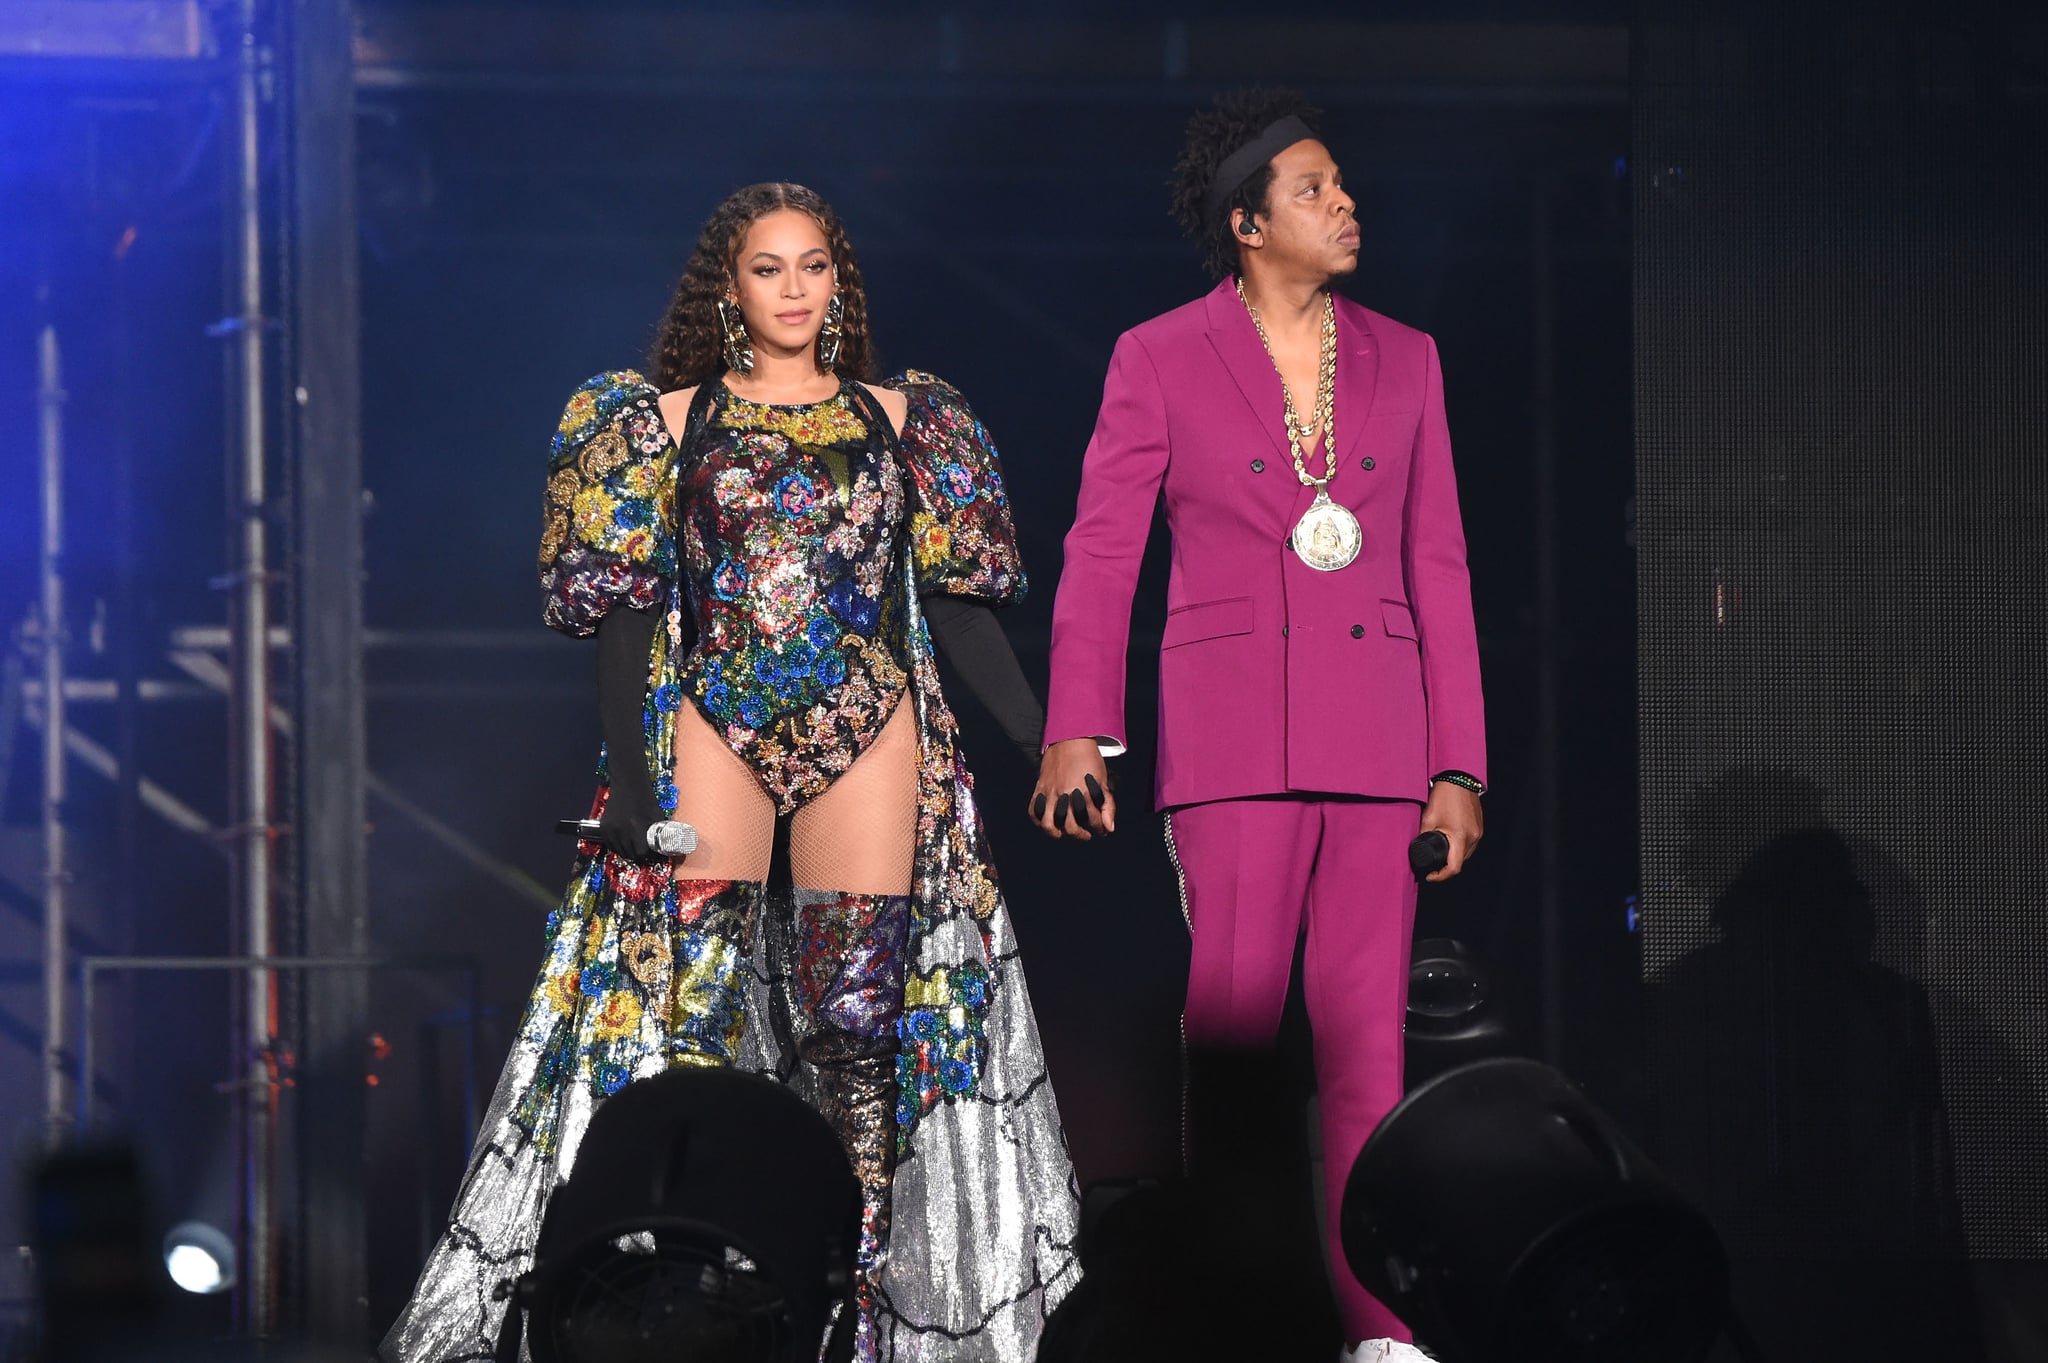 JOHANNESBURG, SOUTH AFRICA - DECEMBER 02:  Beyonce and Jay-Z perform during the Global Citizen Festival: Mandela 100 at FNB Stadium on December 2, 2018 in Johannesburg, South Africa.  (Photo by Kevin Mazur/Getty Images for Global Citizen Festival: Mandela 100)